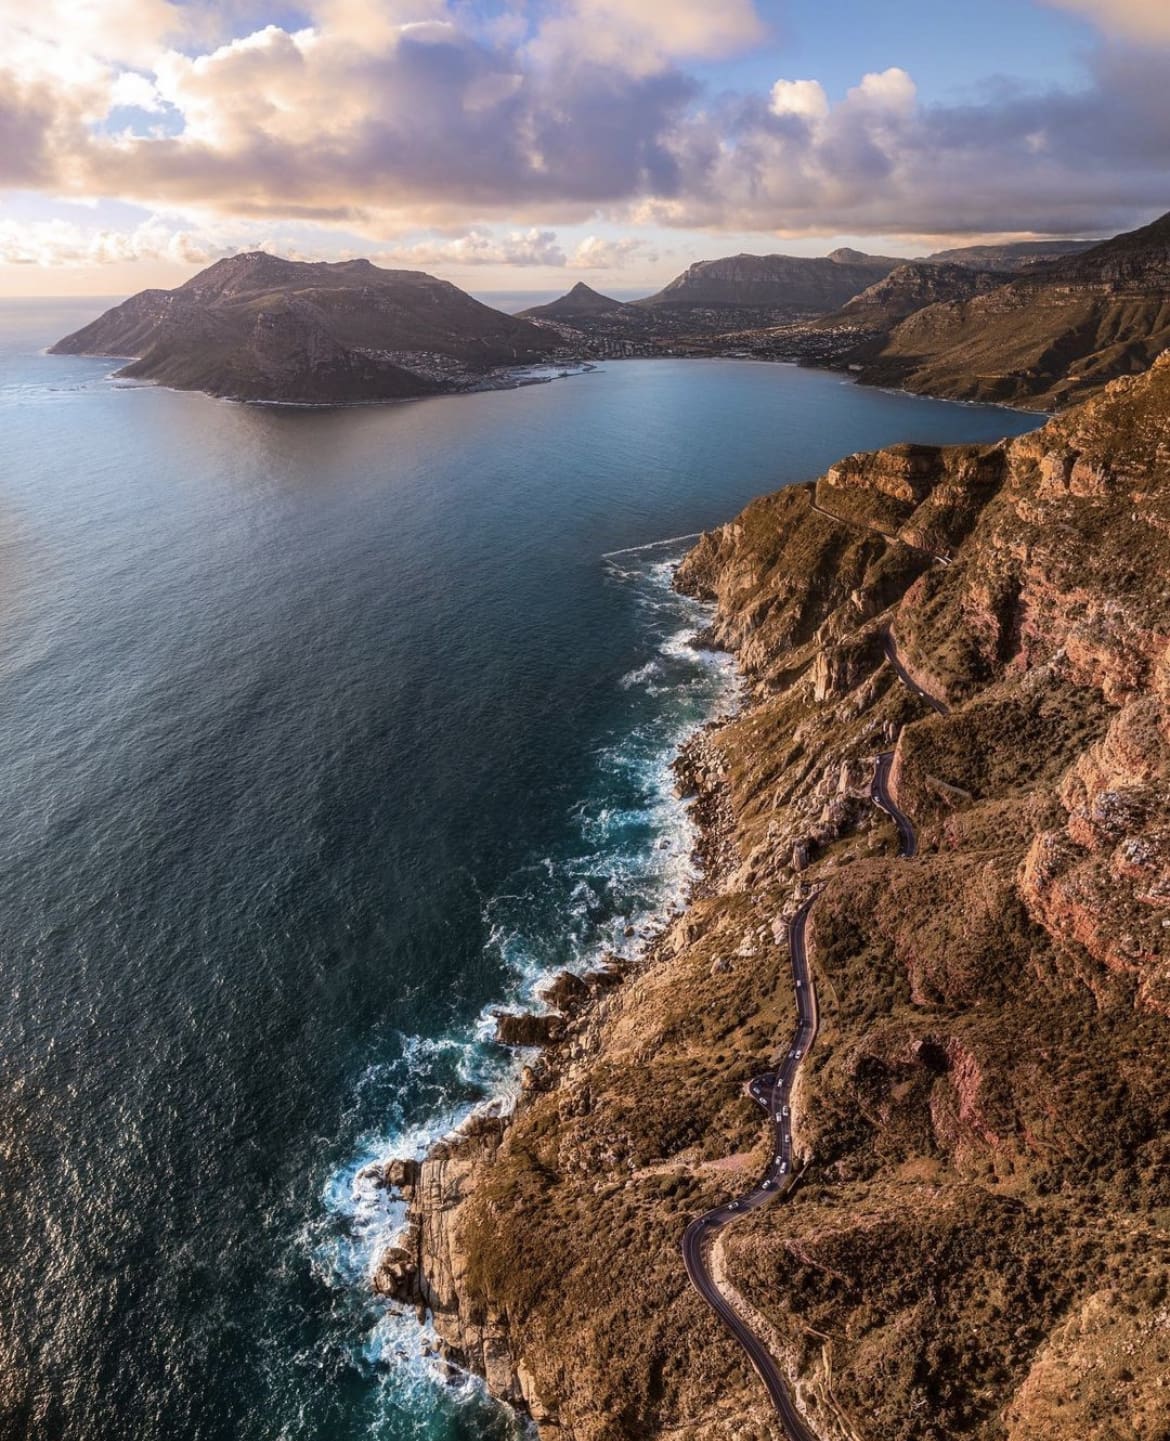 The surreal view from Chapman's Peak